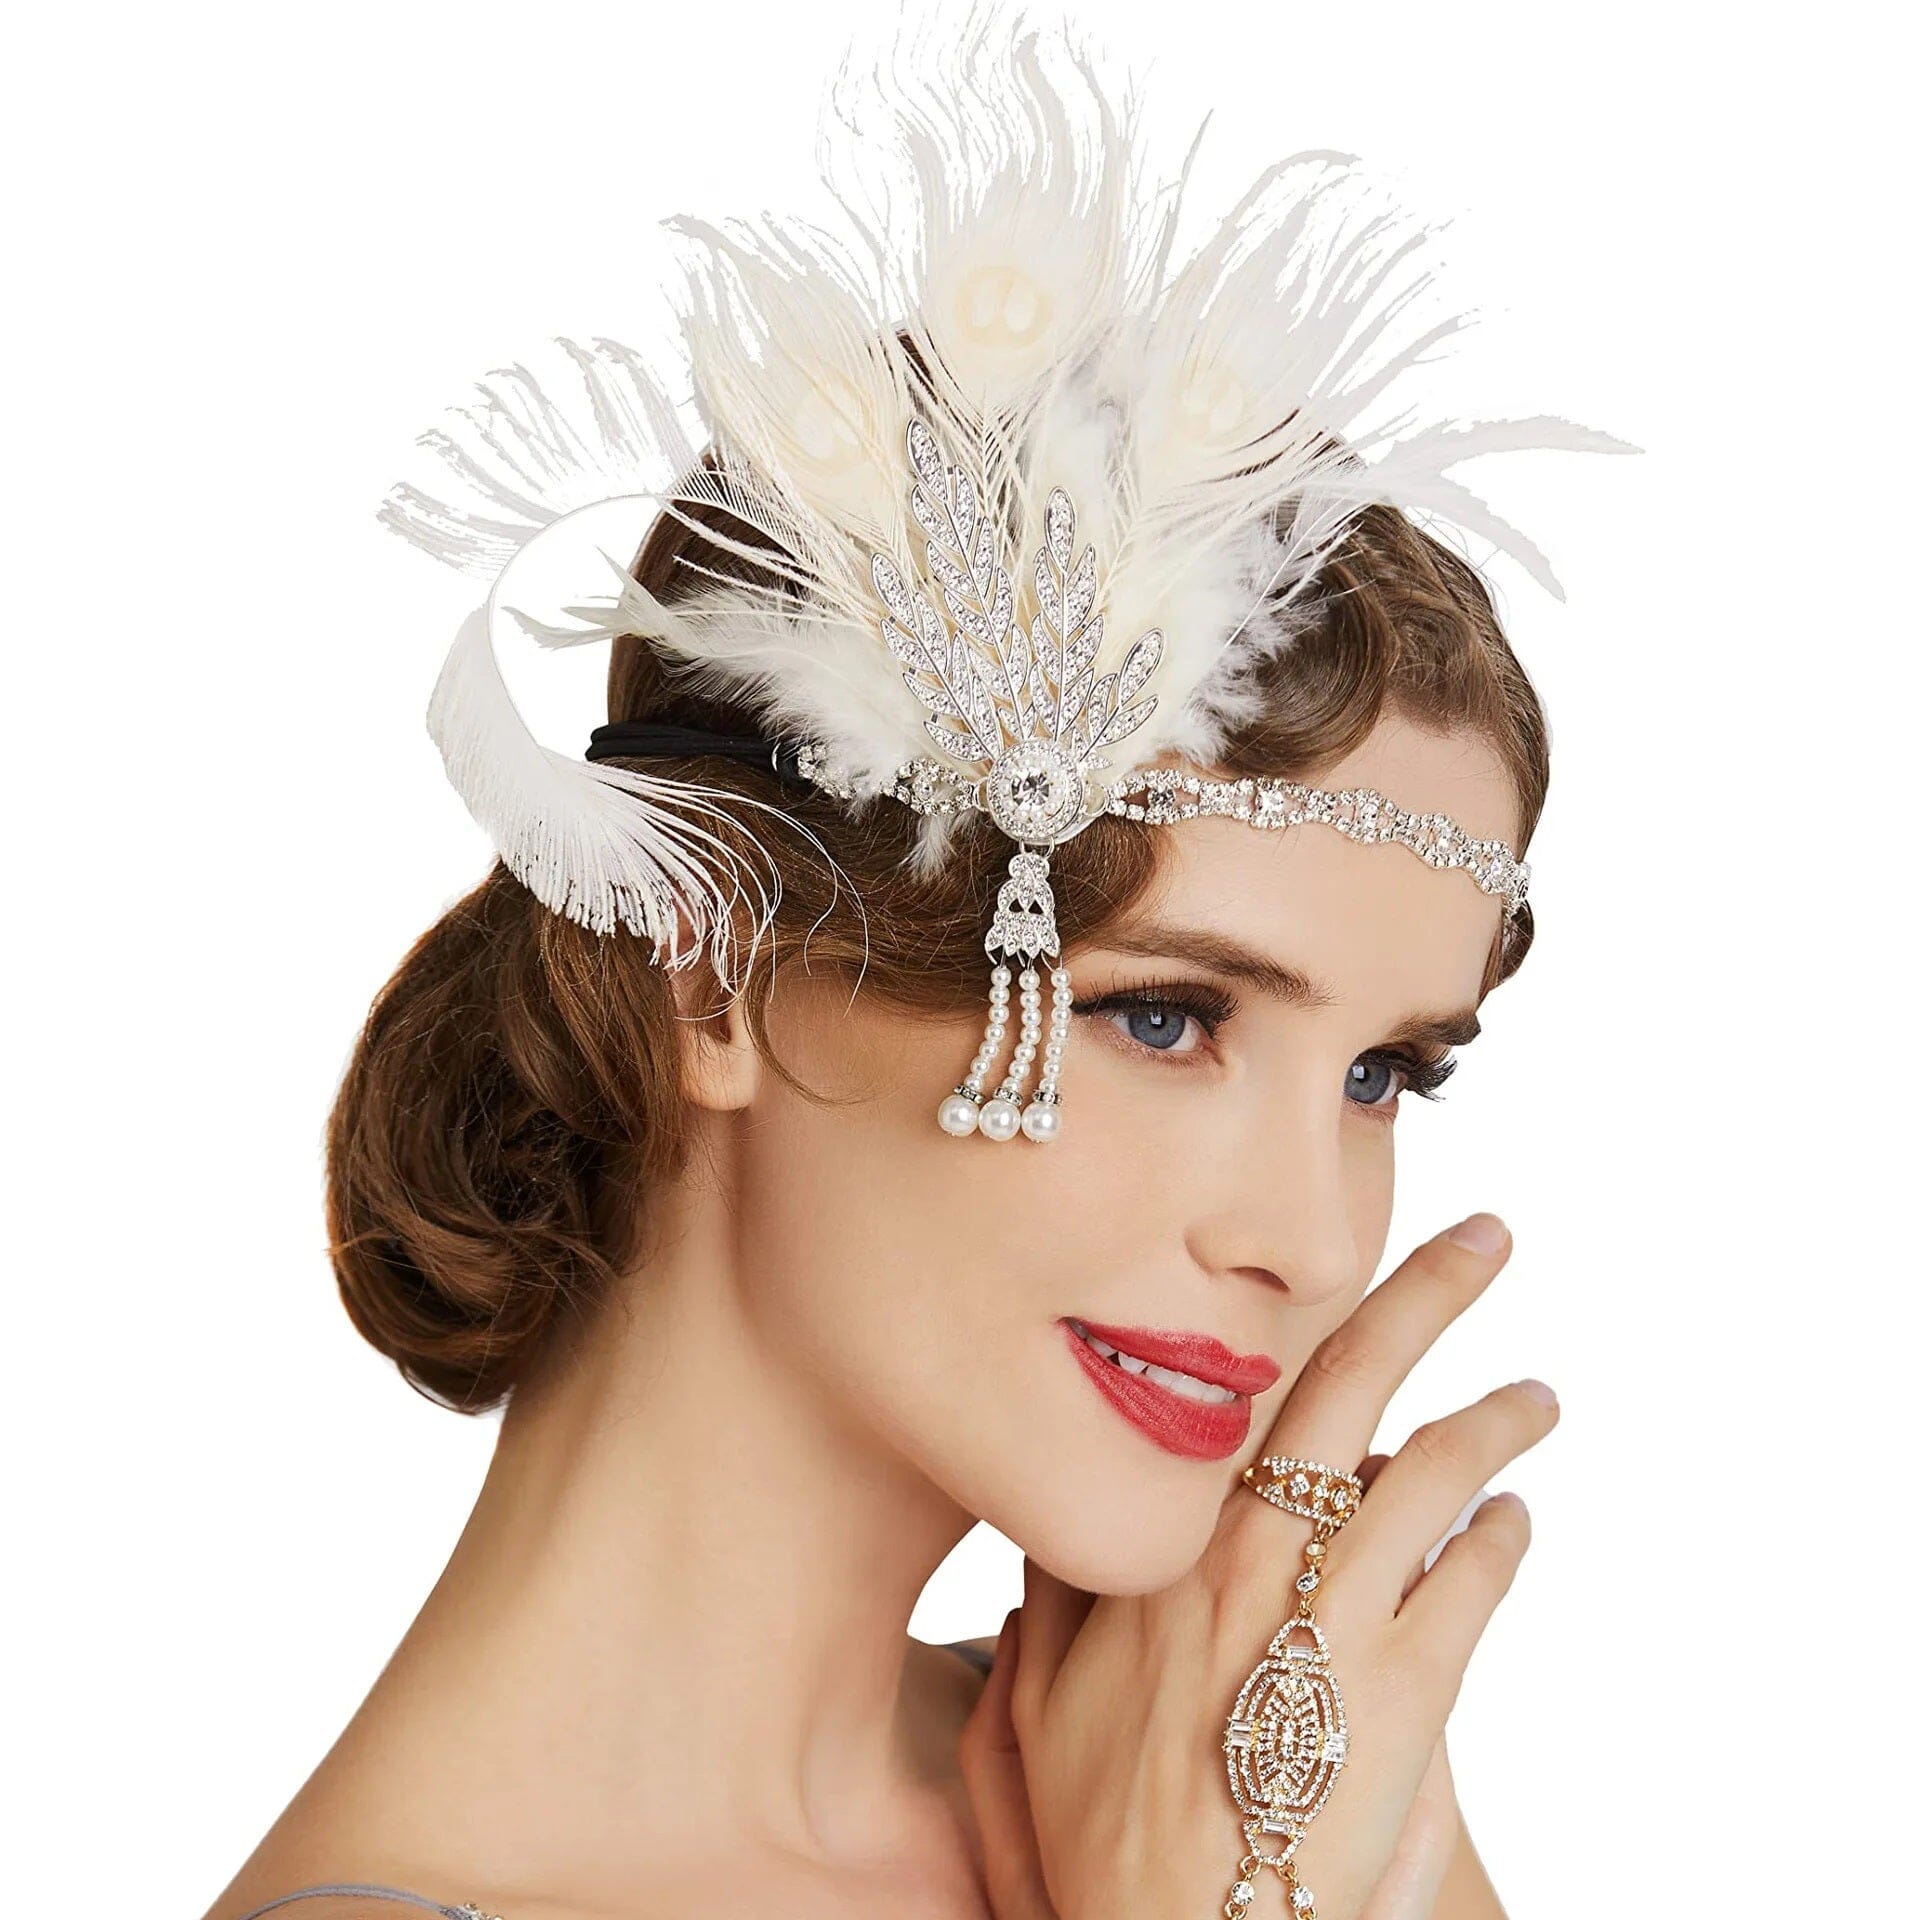 Women Peacock Feather 1920s Flapper Headpiece Vintage Party Rhinestone Hair Accessories Fascinators jehouze Ivory 